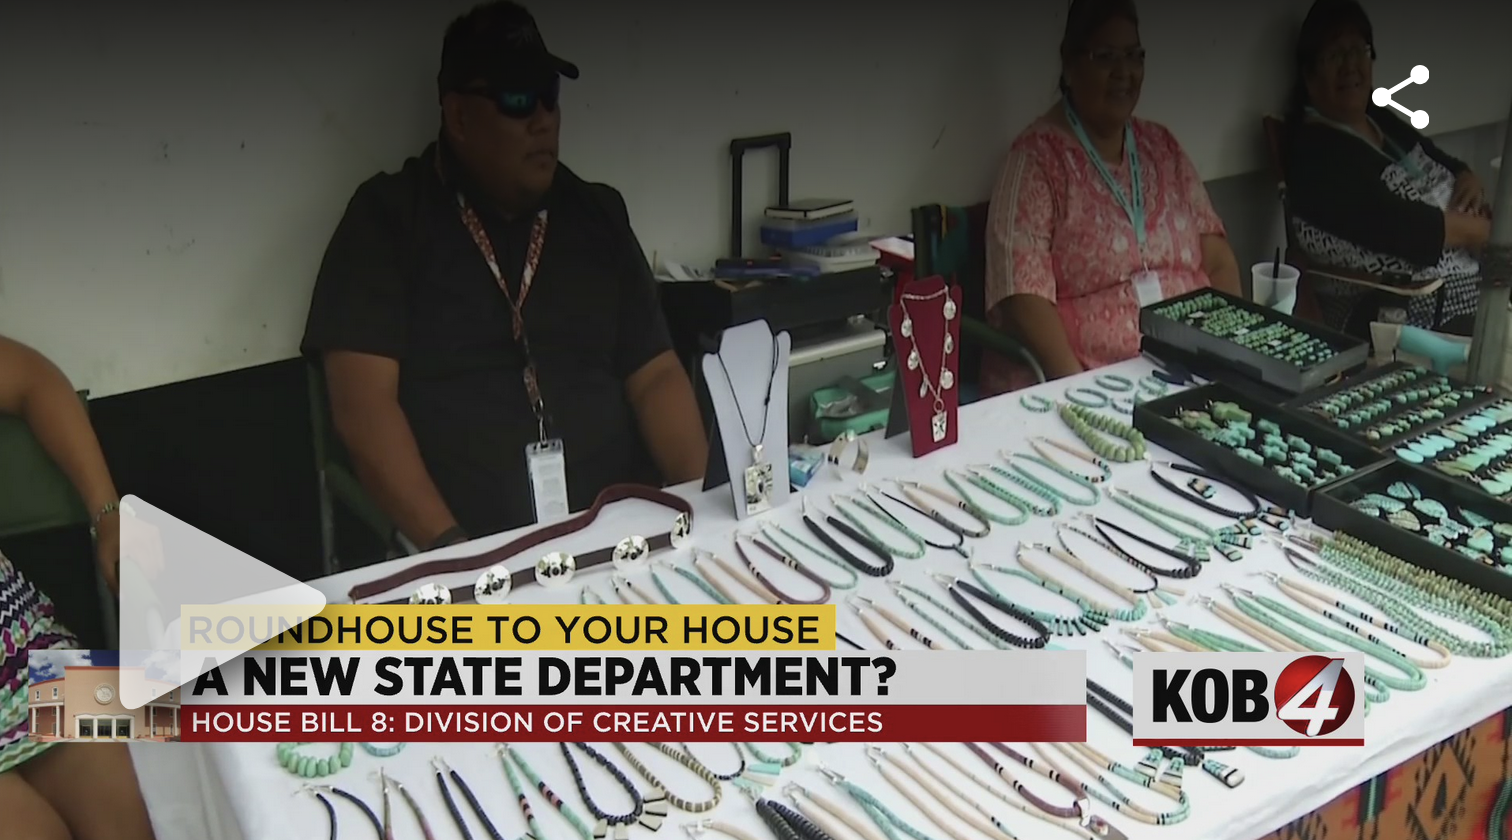 A screenshot of a video from KOB news, showing native jewelry artists selling their art. The video is about the new Creative Services division bill in New Mexico.